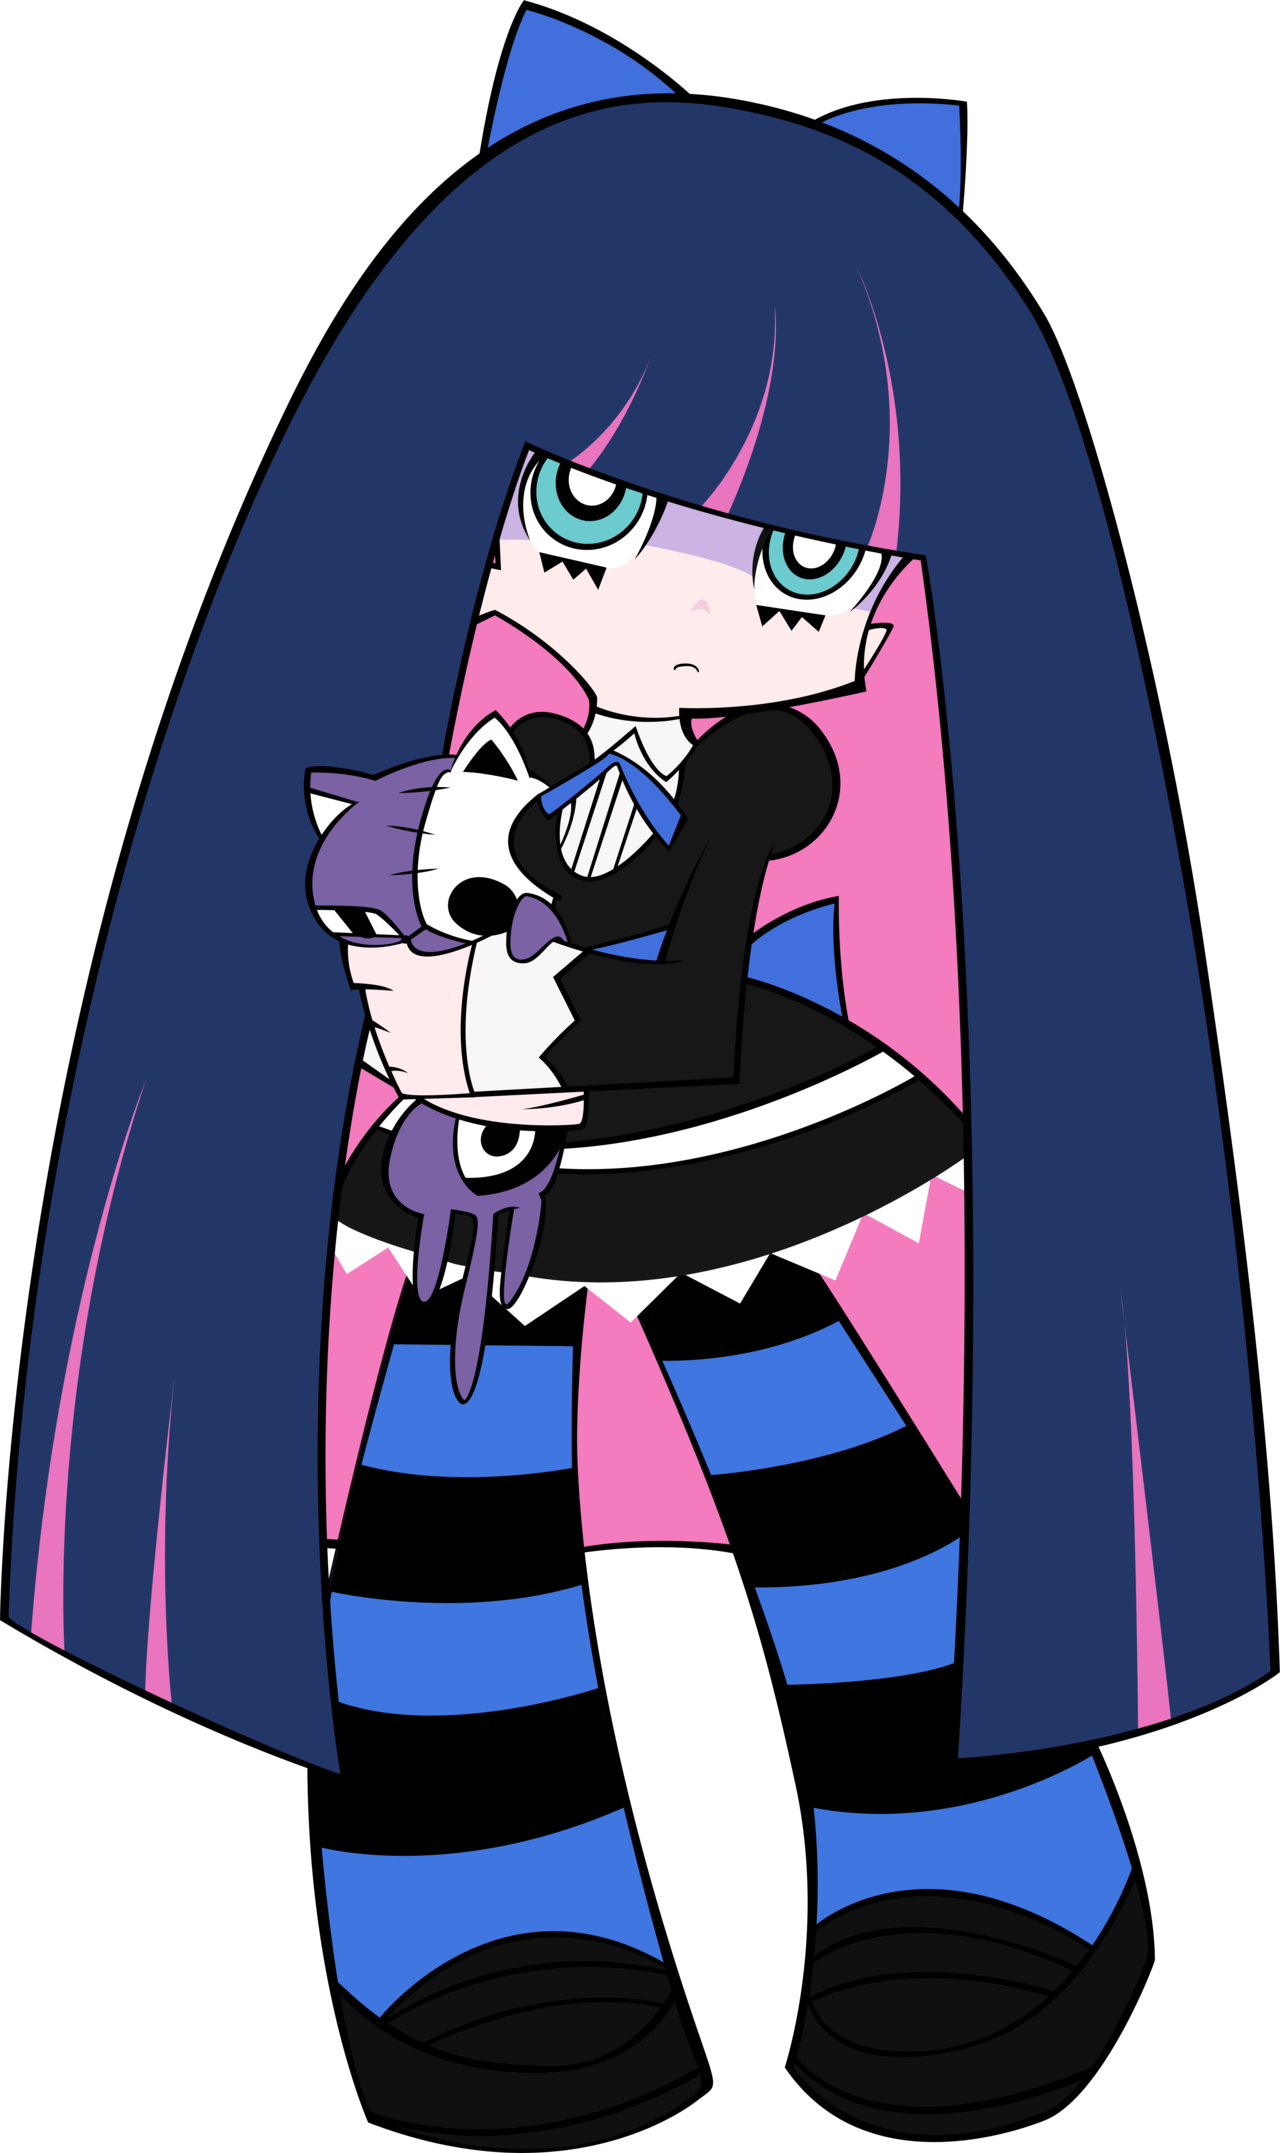 Stocking from Panty and Stocking with Garterbelt. 